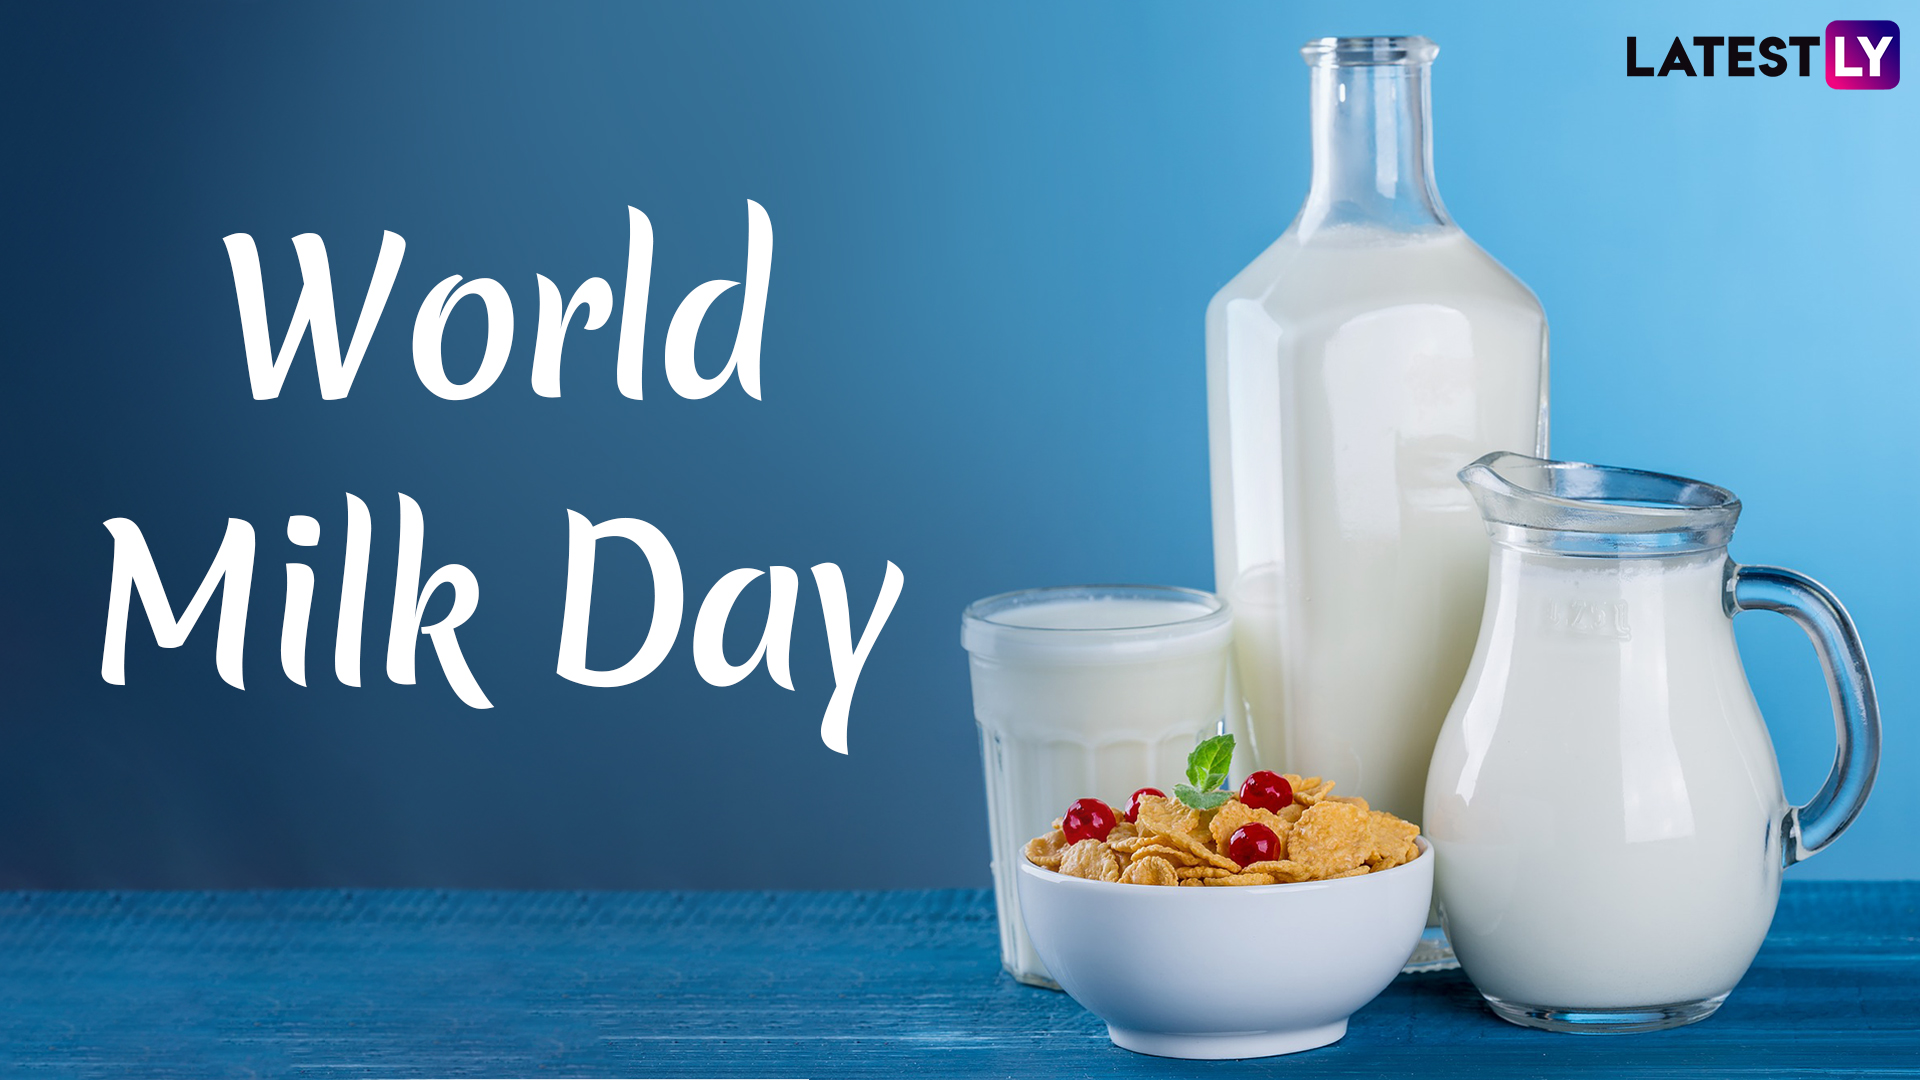 World Milk Day 2022 Images & HD Wallpapers for Free Download Online